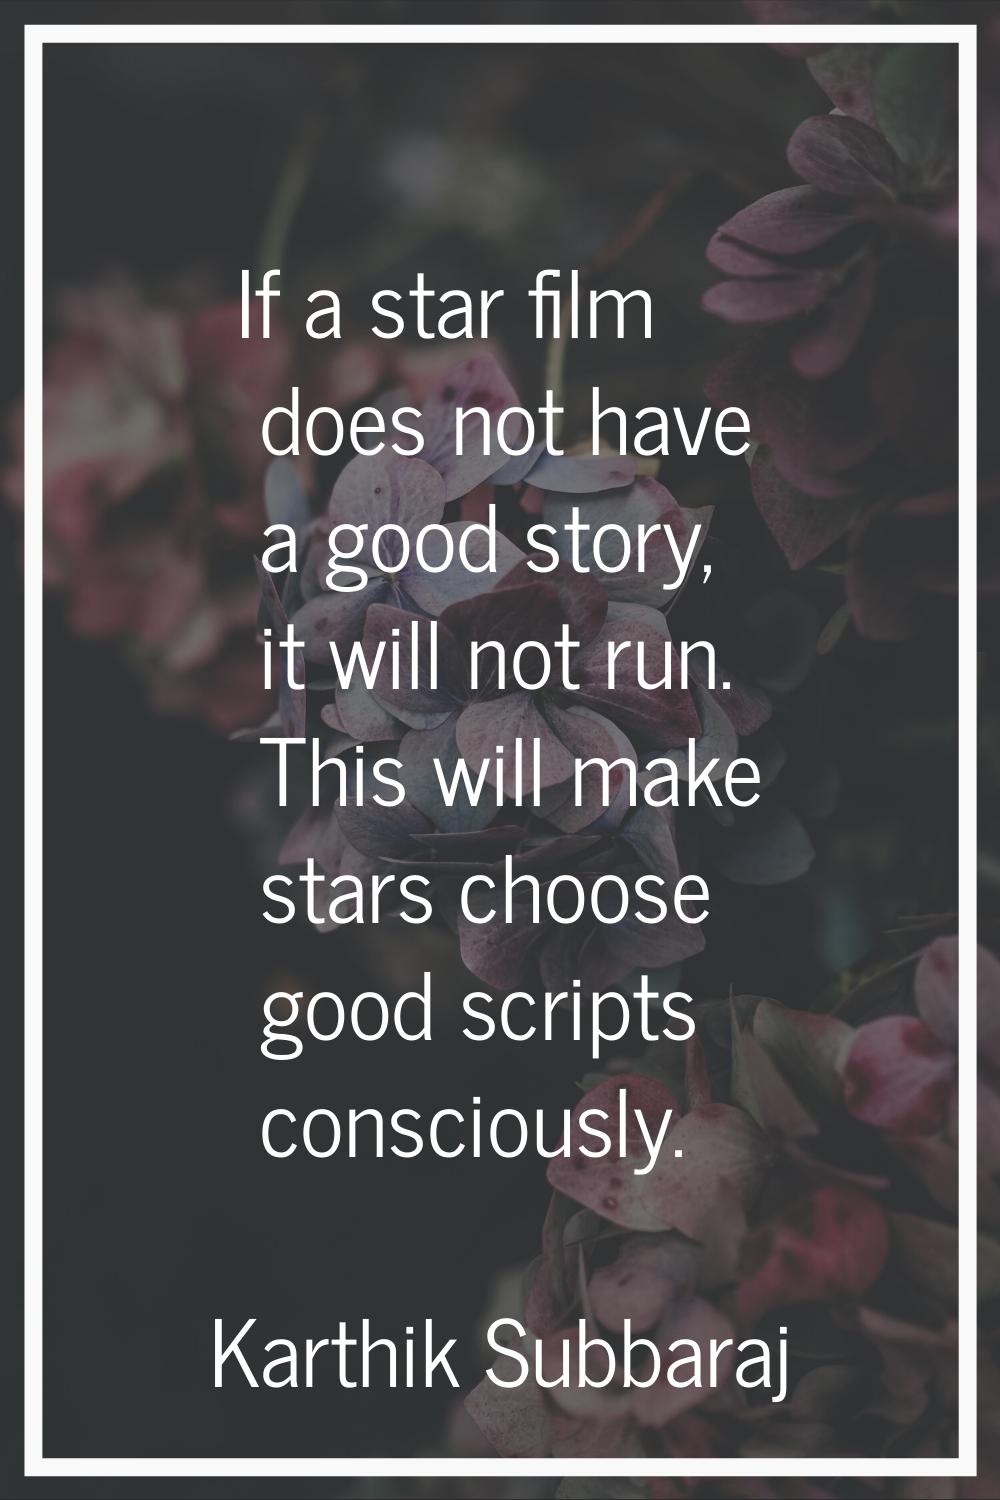 If a star film does not have a good story, it will not run. This will make stars choose good script